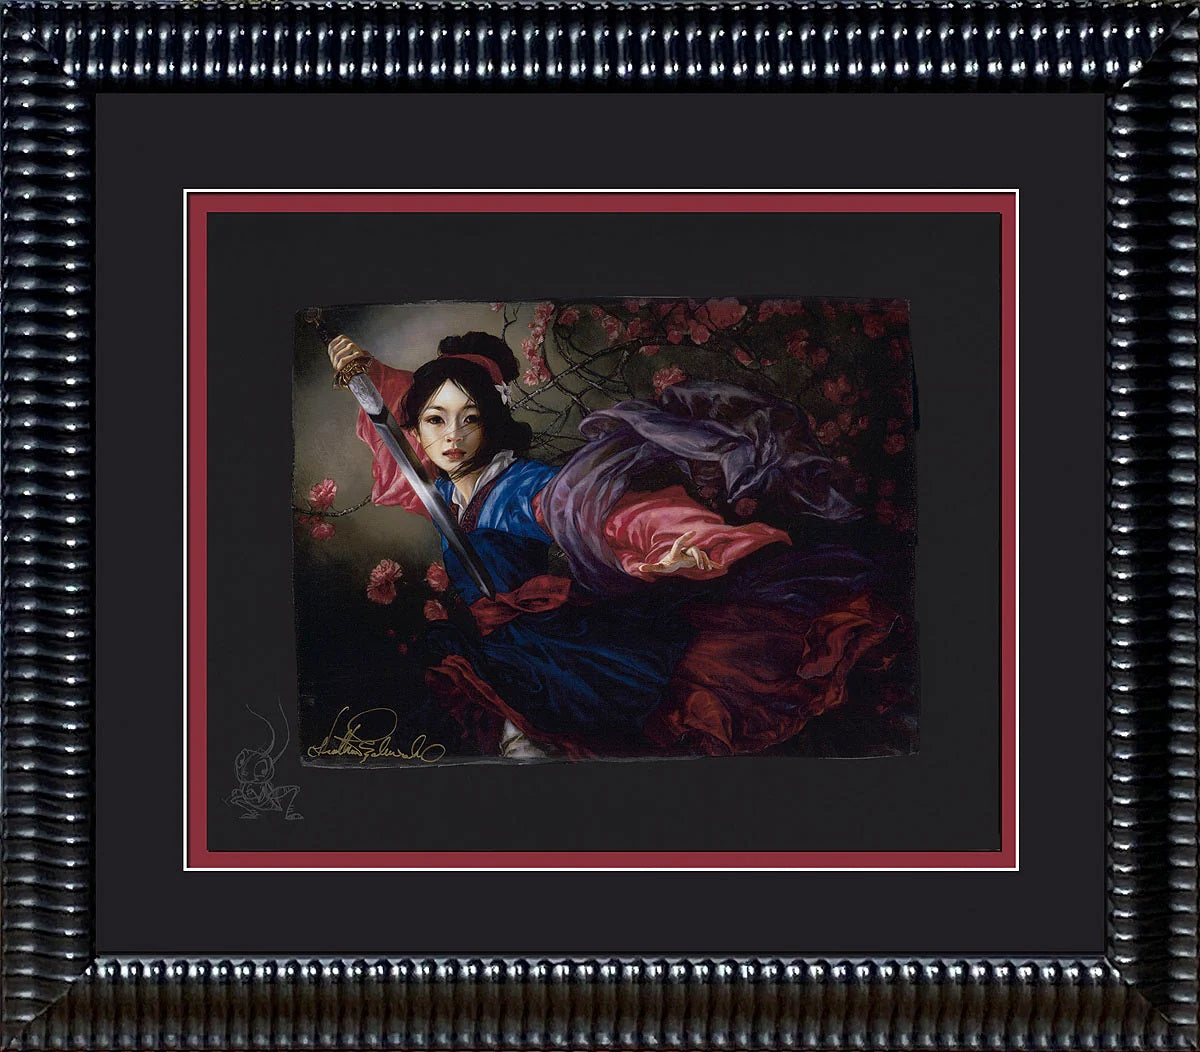 Mulan draped in traditional clothing. Framed